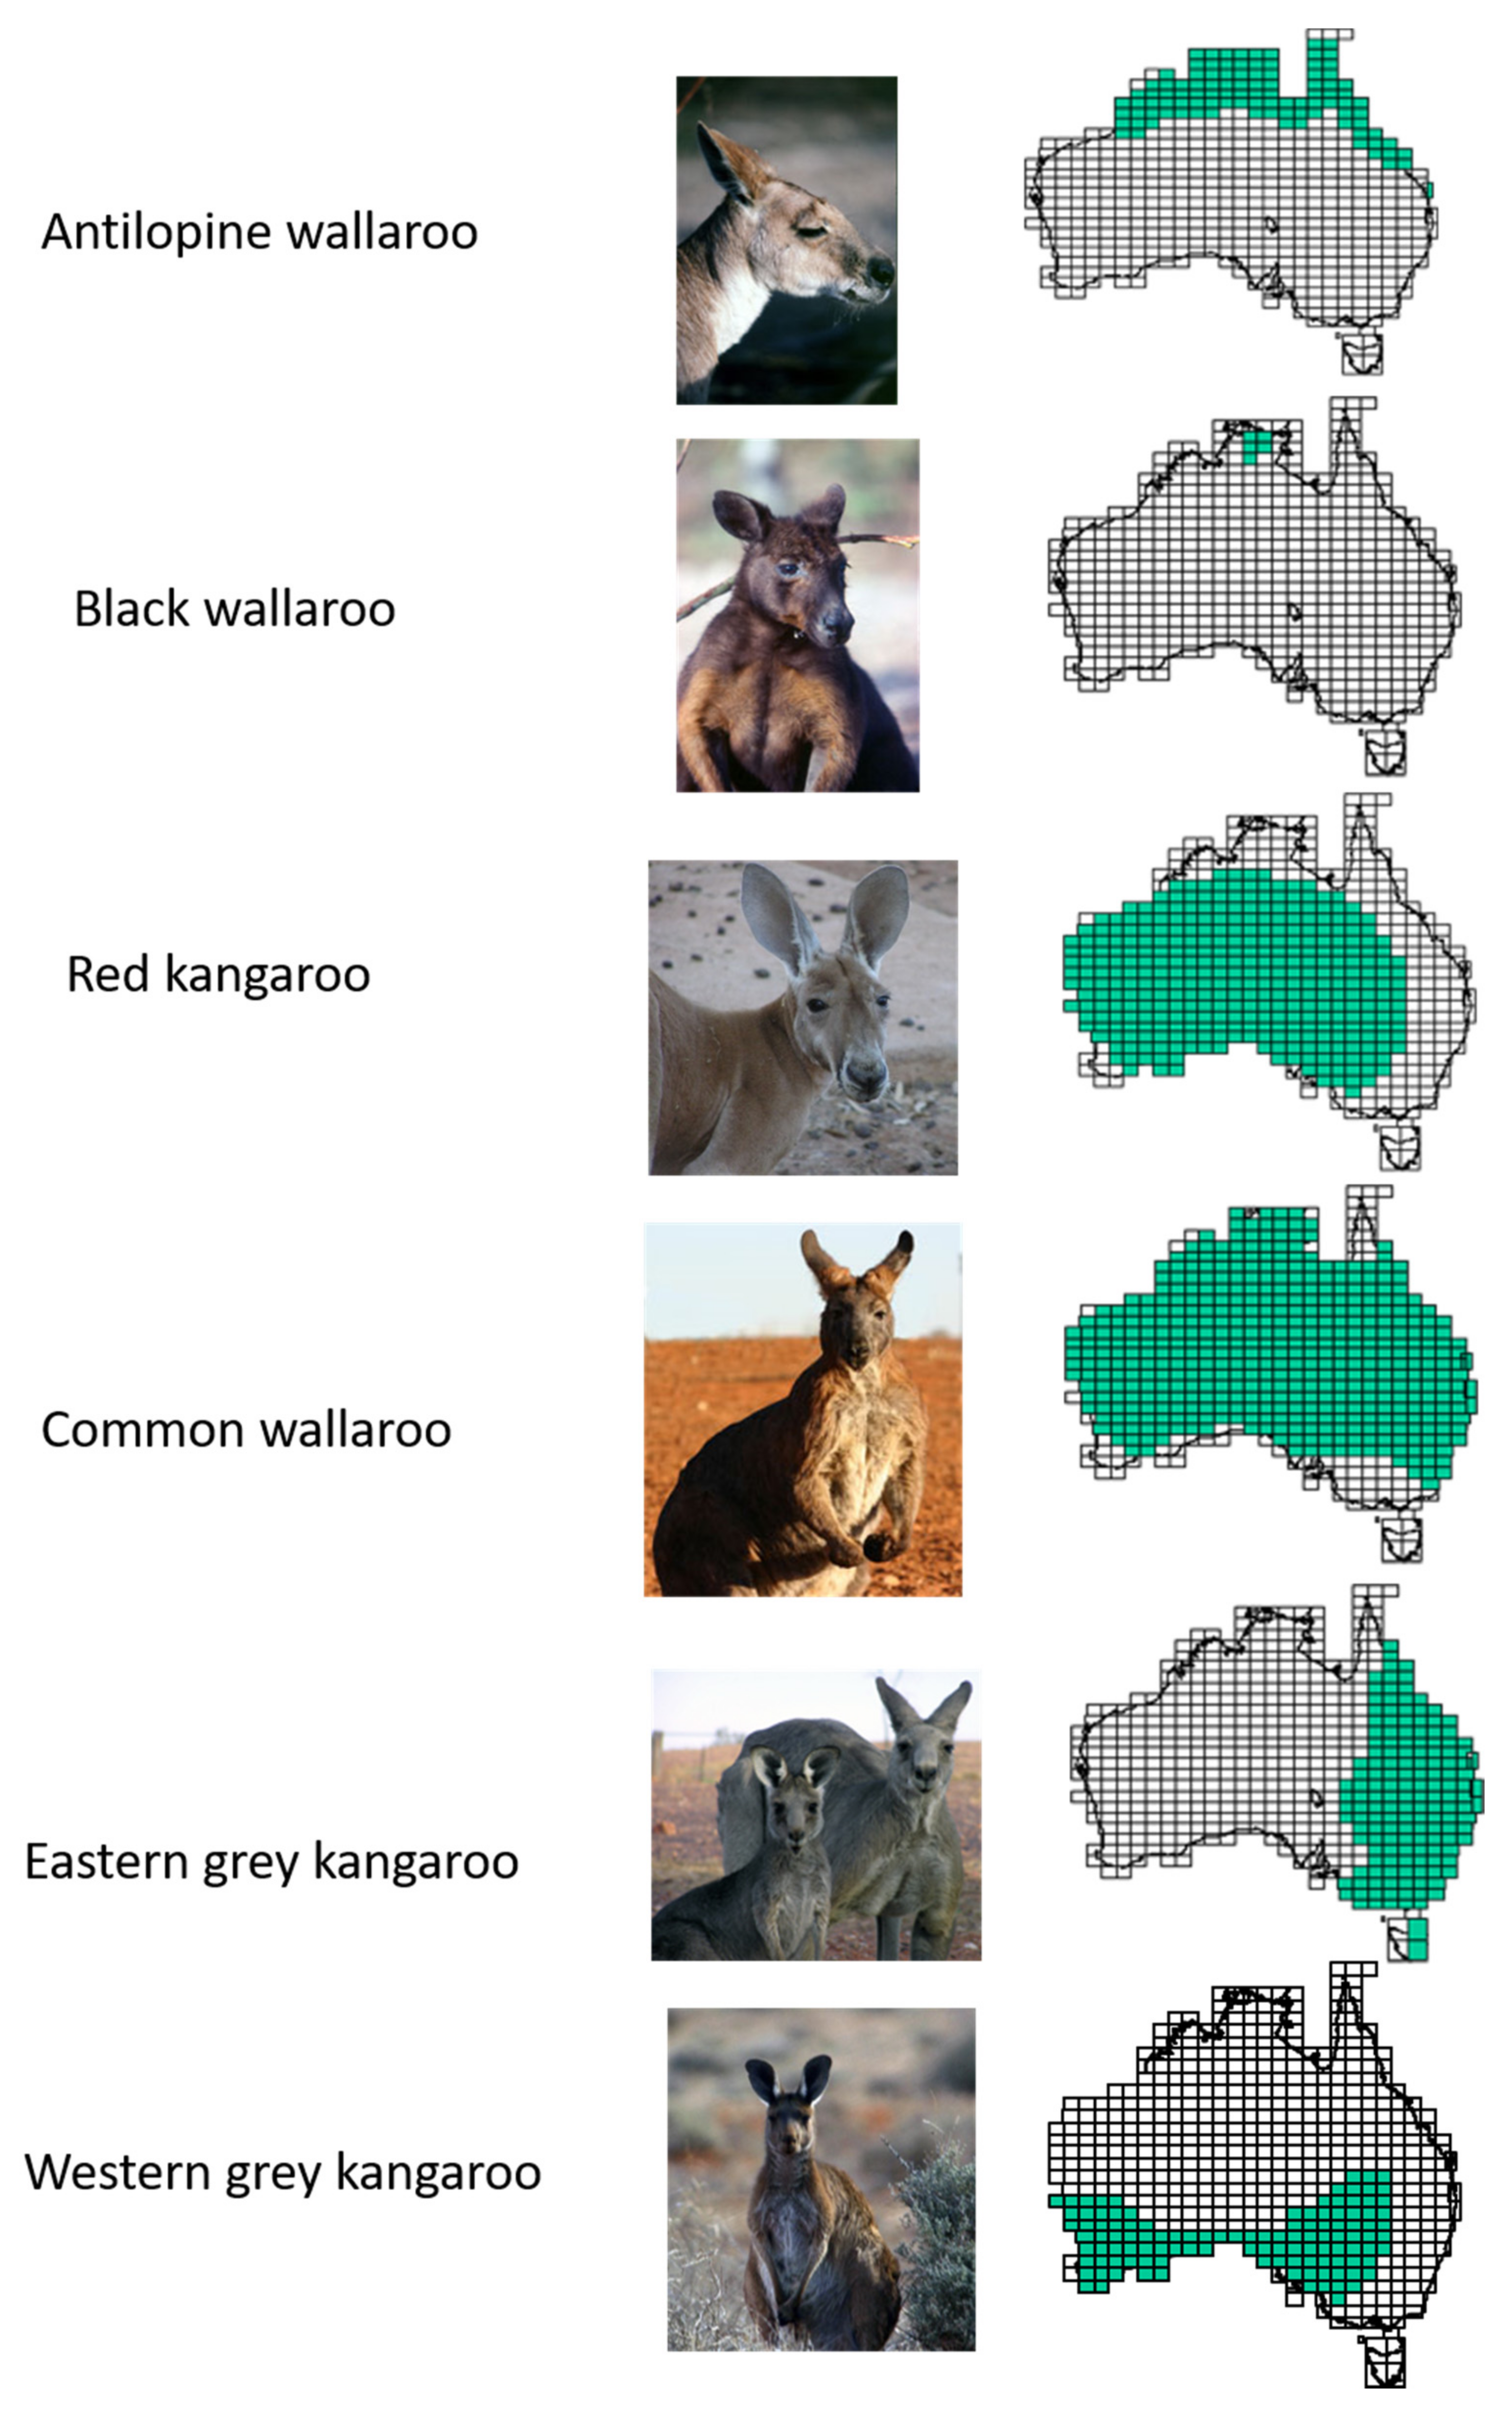 Animals Free Full-Text The Perils of Being Populous Control and Conservation of Abundant Kangaroo Species pic